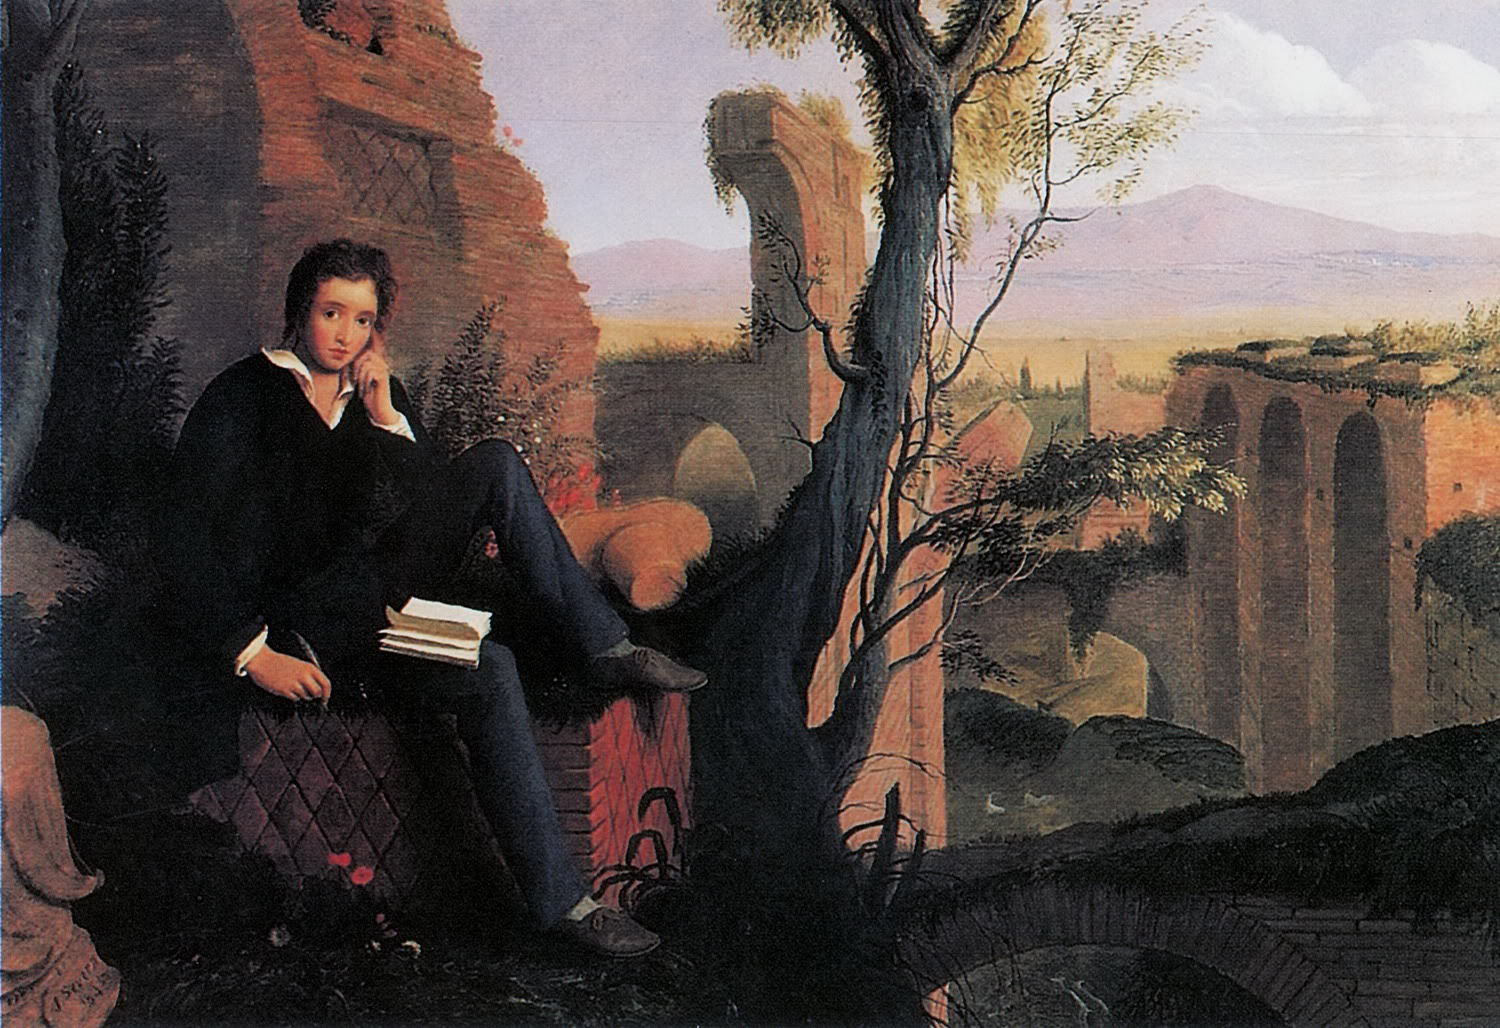 Painting of romantic poet sat in front of some ancient ruins